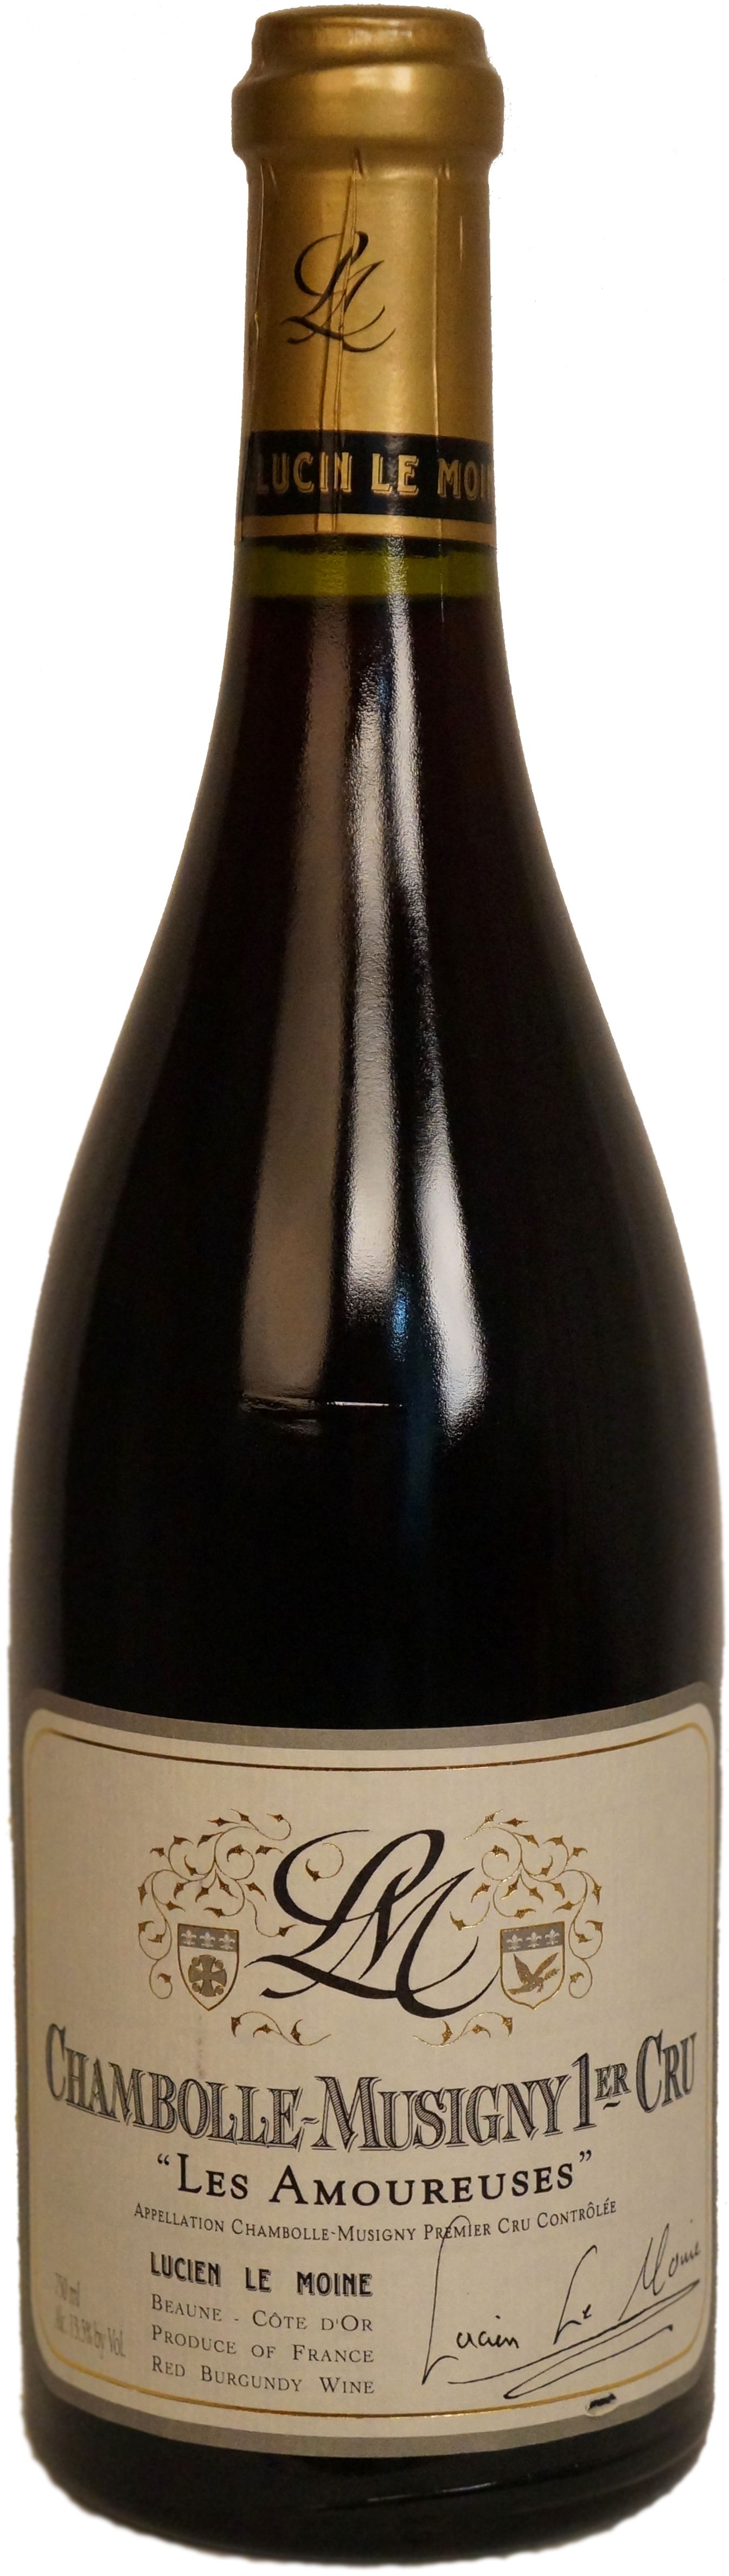 Lucien Le Moine, Chambolle-Musigny 1er Cru Les Amoureuses, 2009